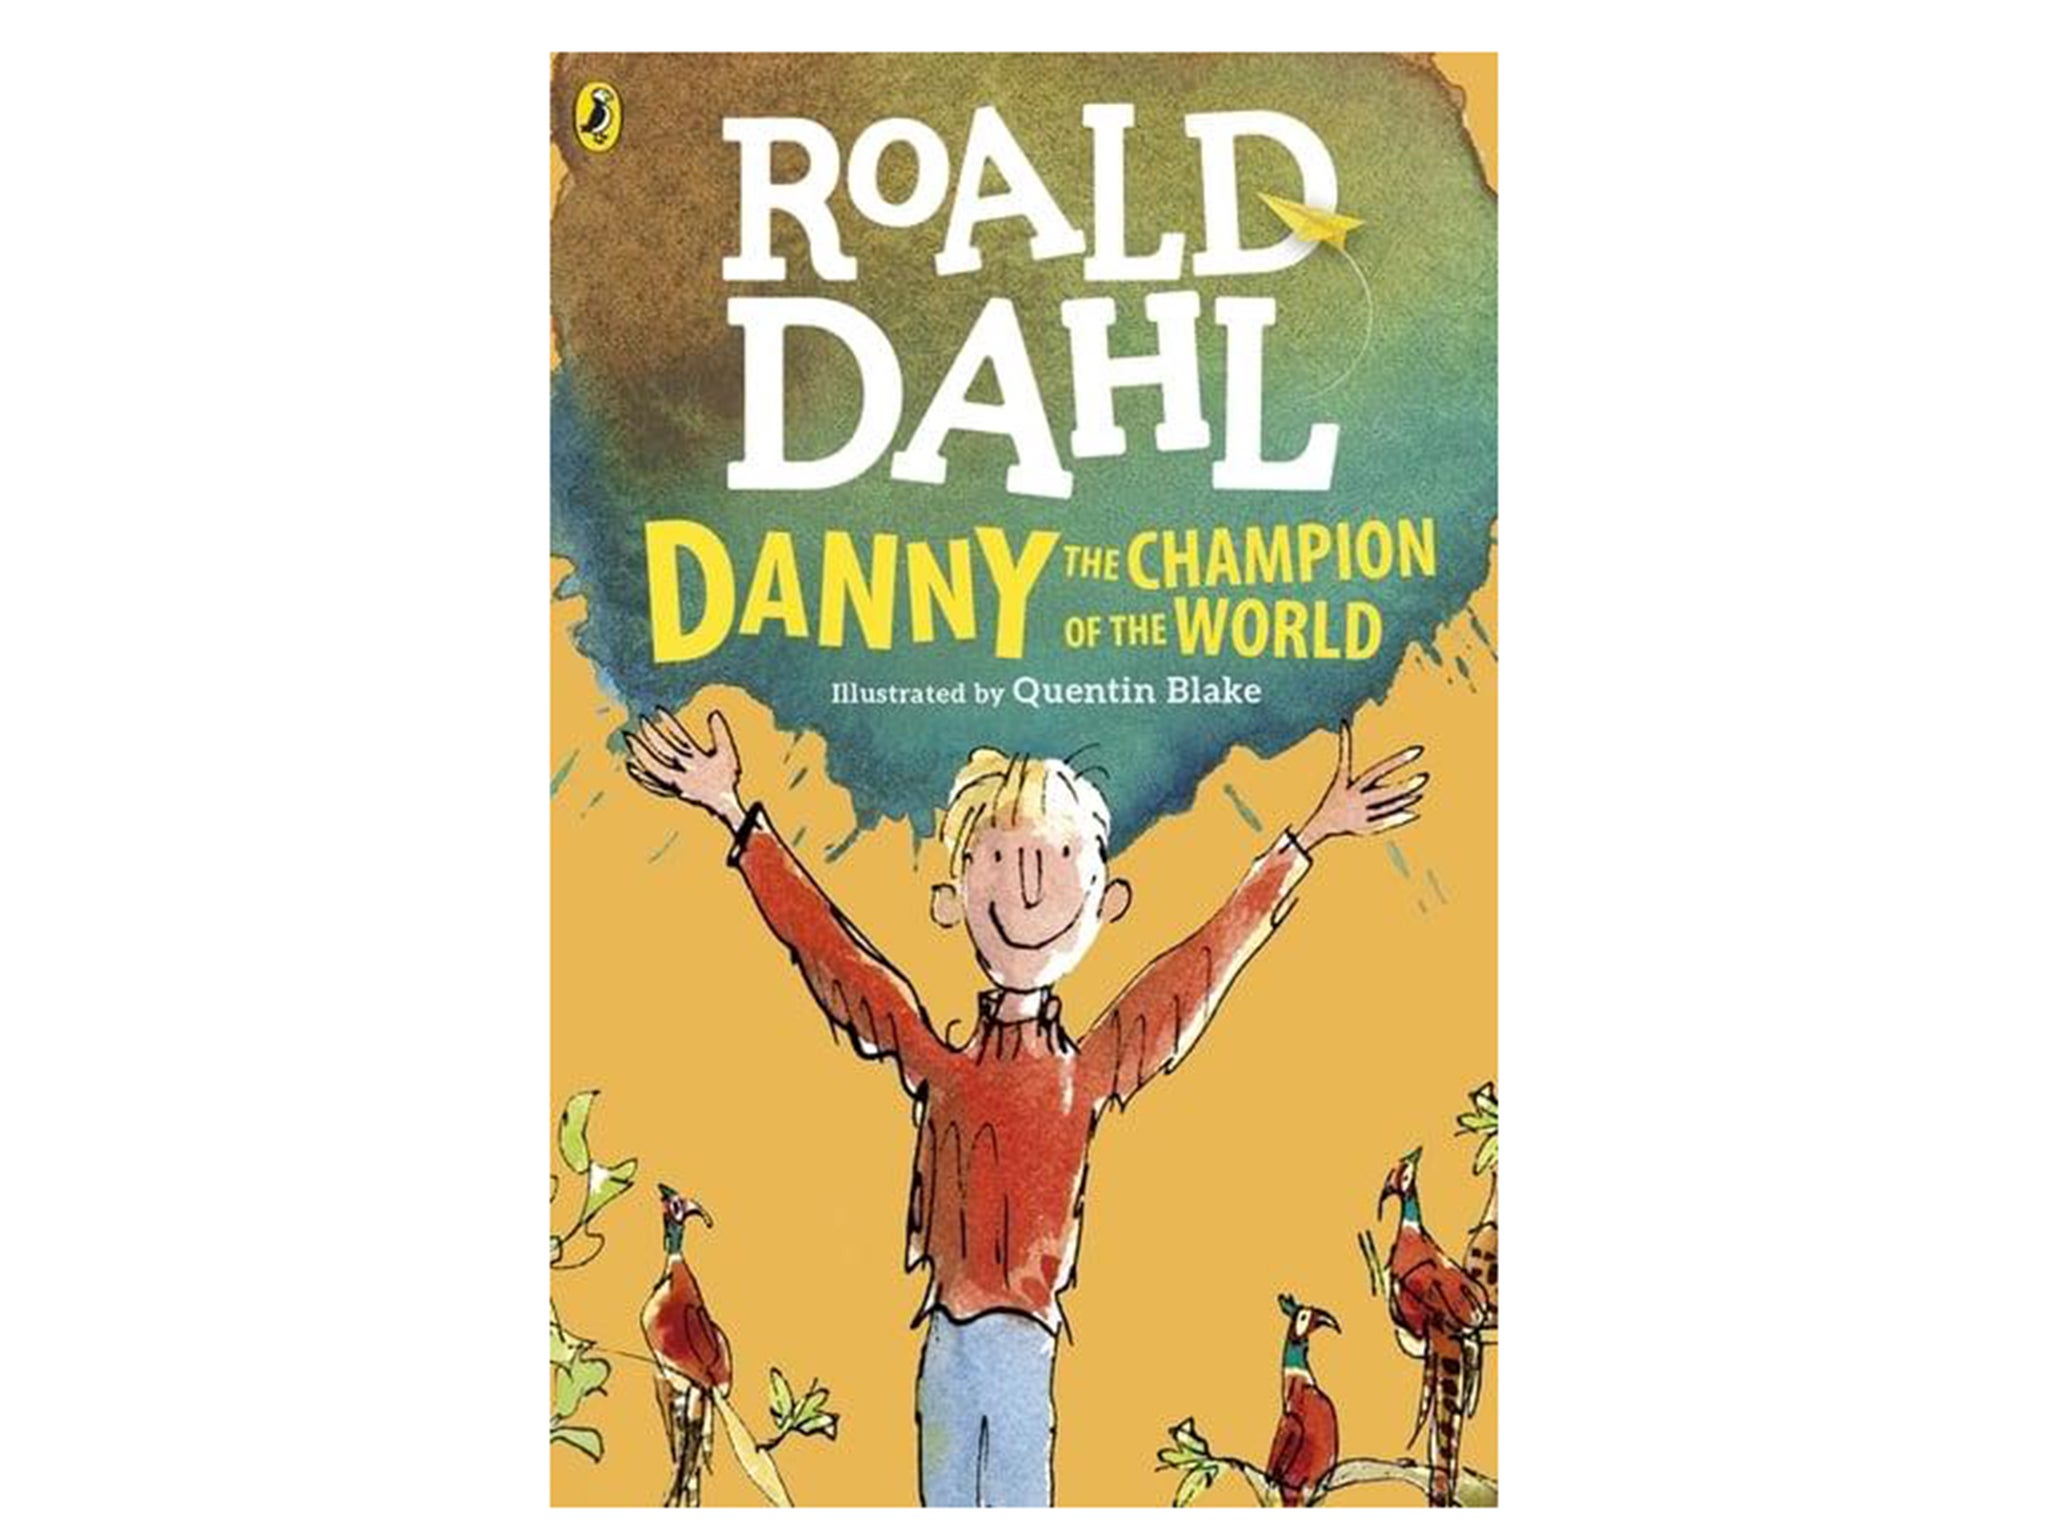 Danny the Champion of the World  indybest roald dahl.jpg